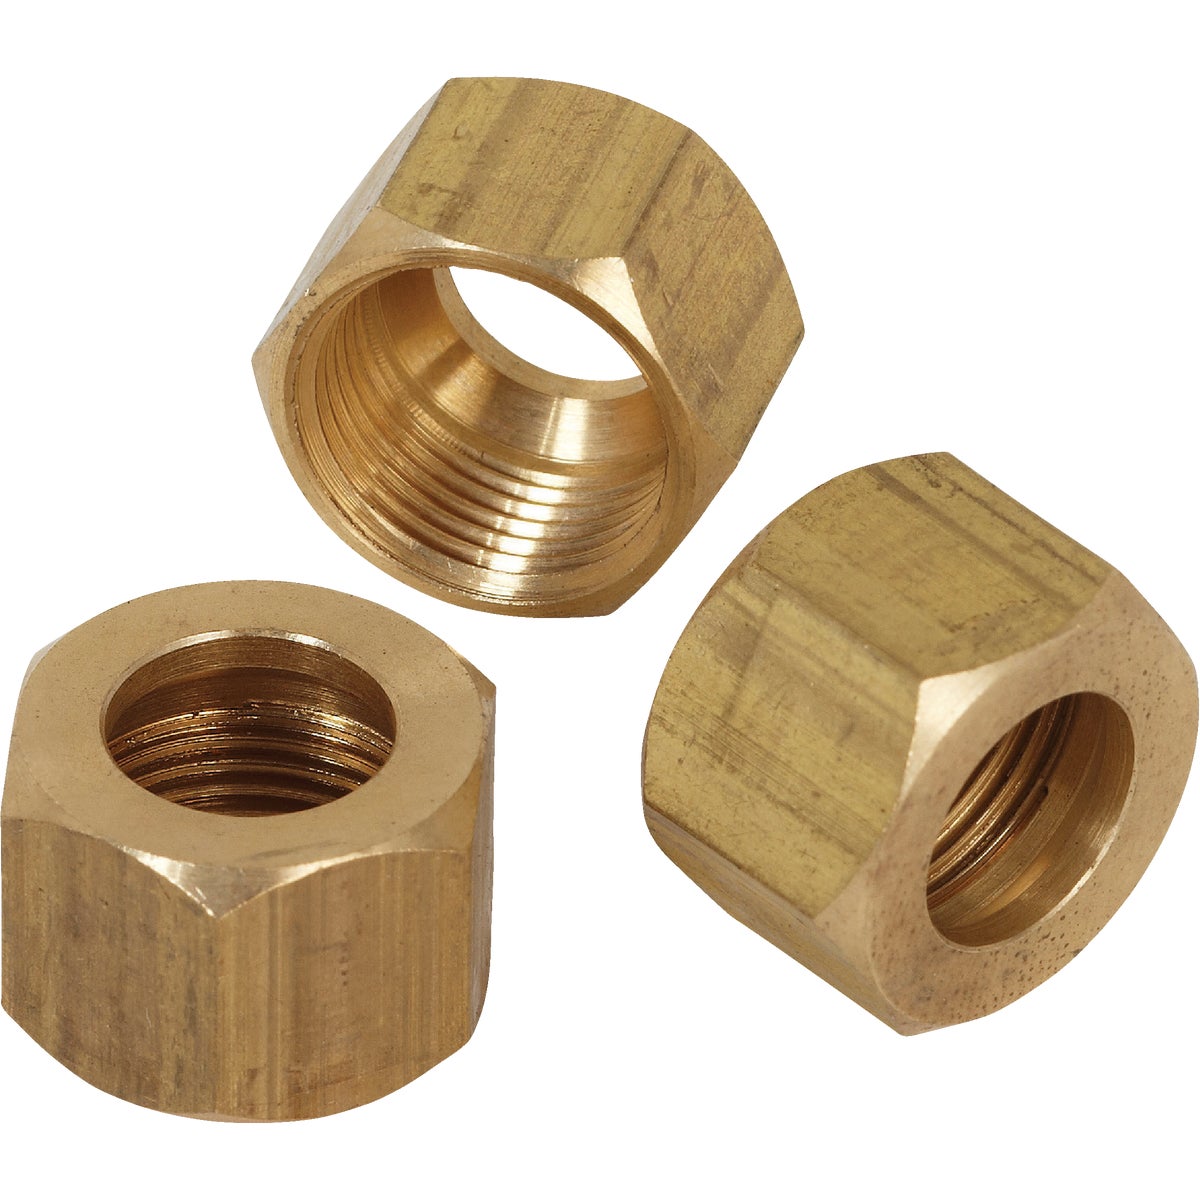 Do it 1/2 In. OD Brass Compression Nut (2-Pack)